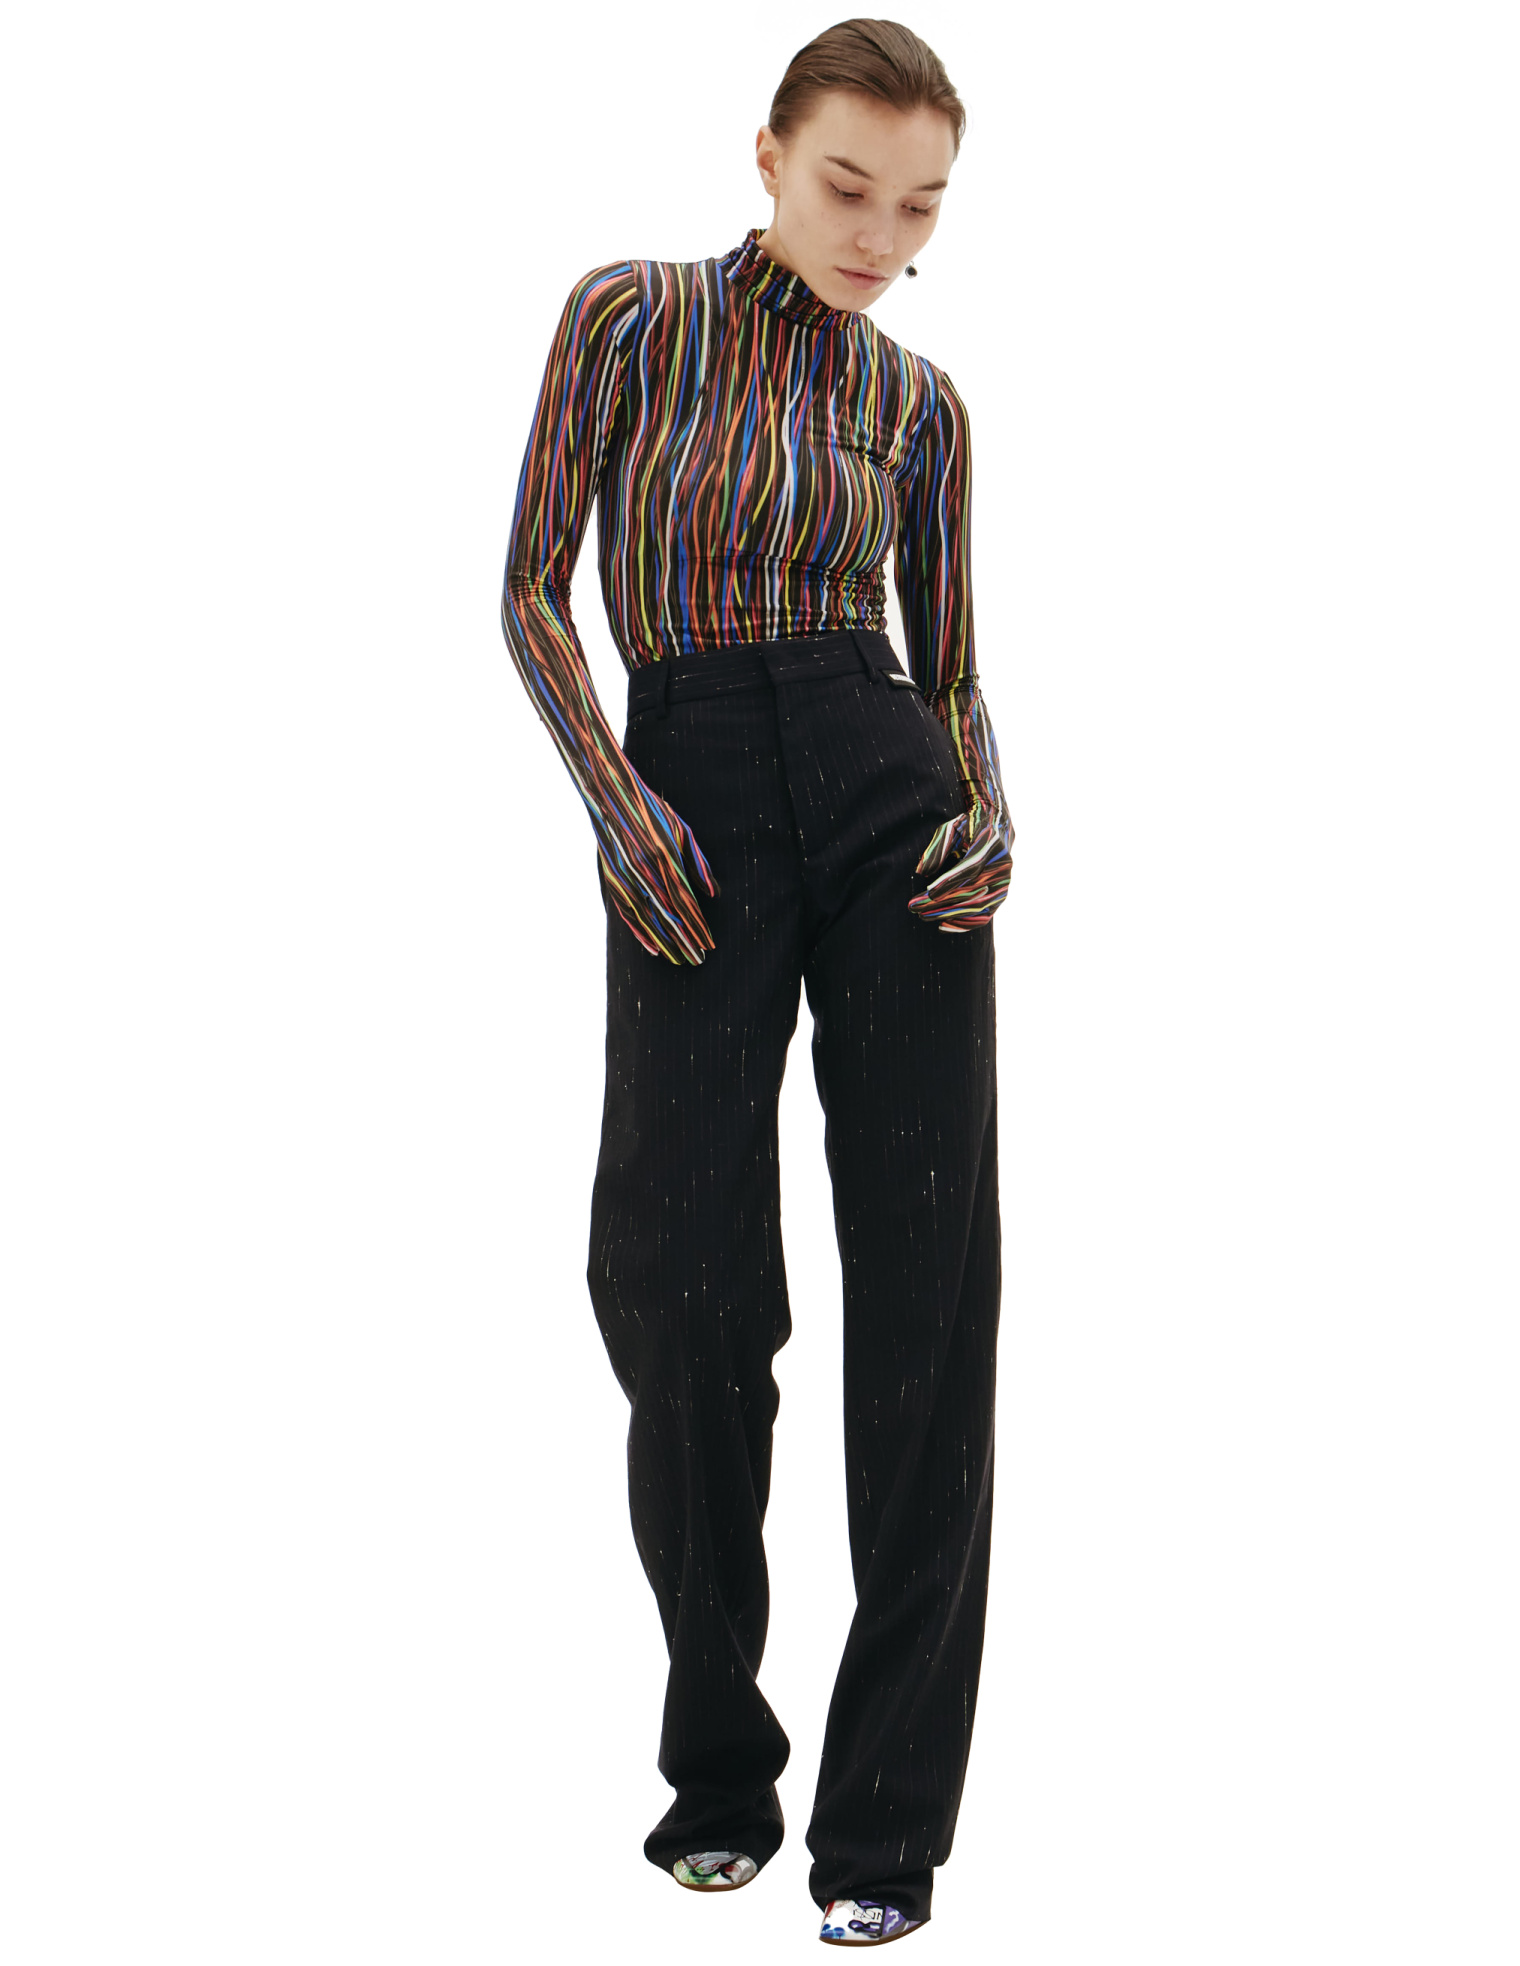 VETEMENTS Нigh-waisted striped pants